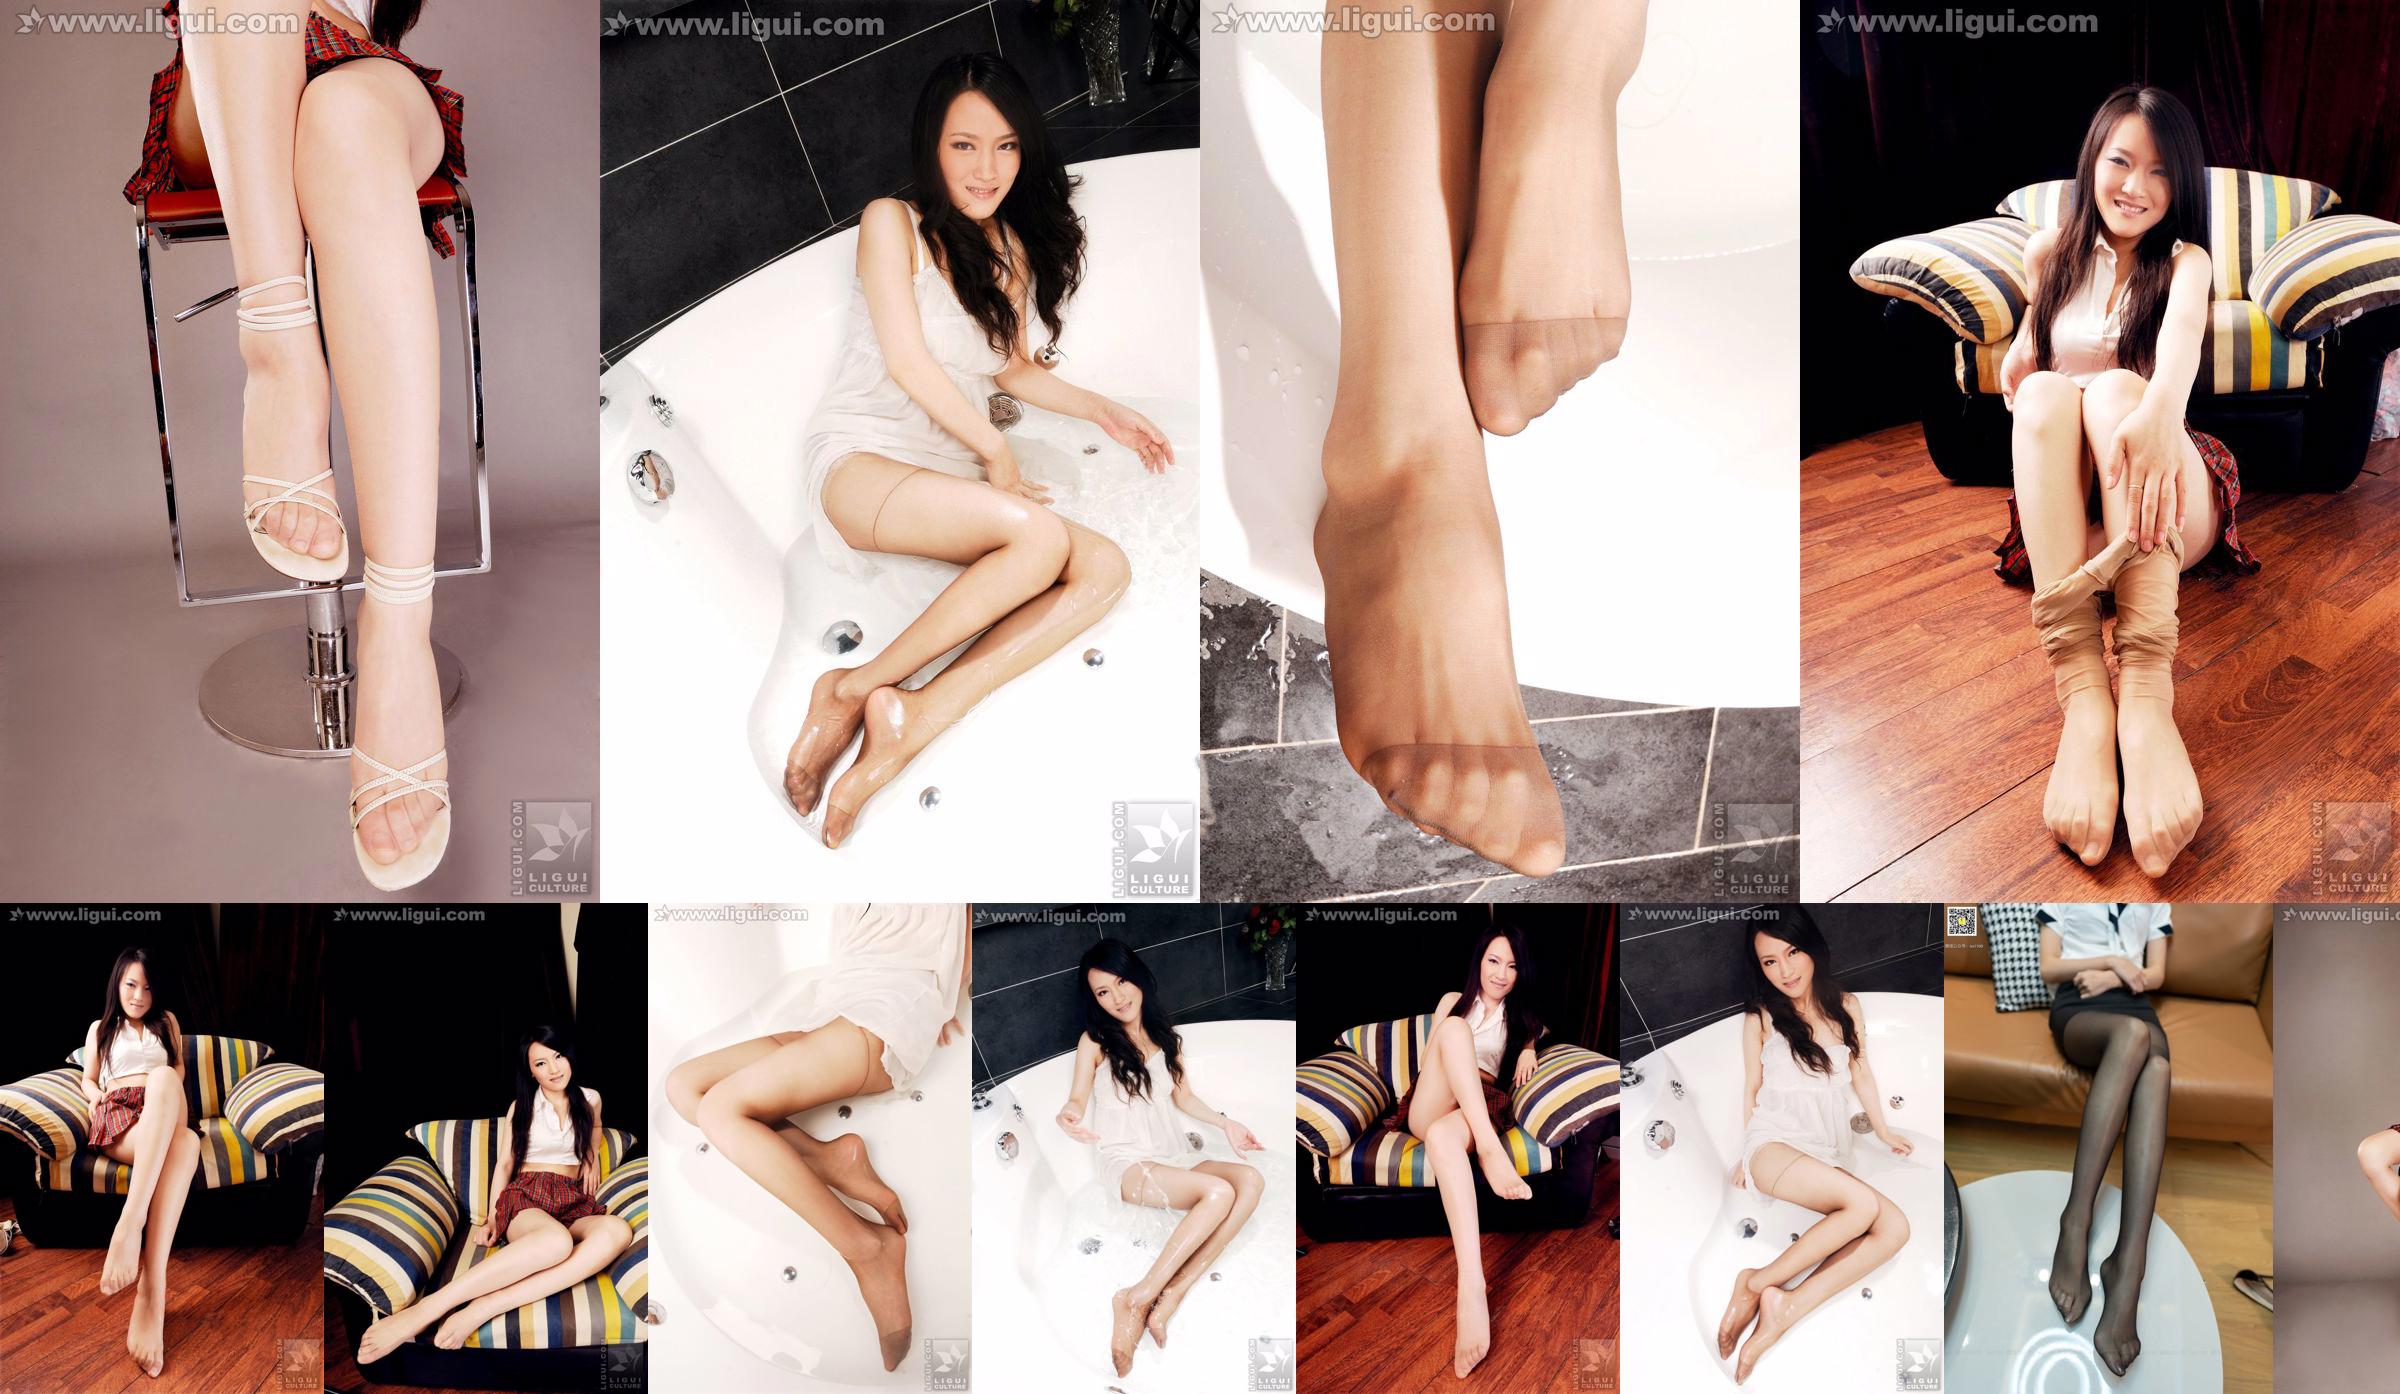 Model Wen Ting "Pure and Beautiful Feet" [丽柜LiGui] Silk Foot Photo Picture No.1b9233 Page 8